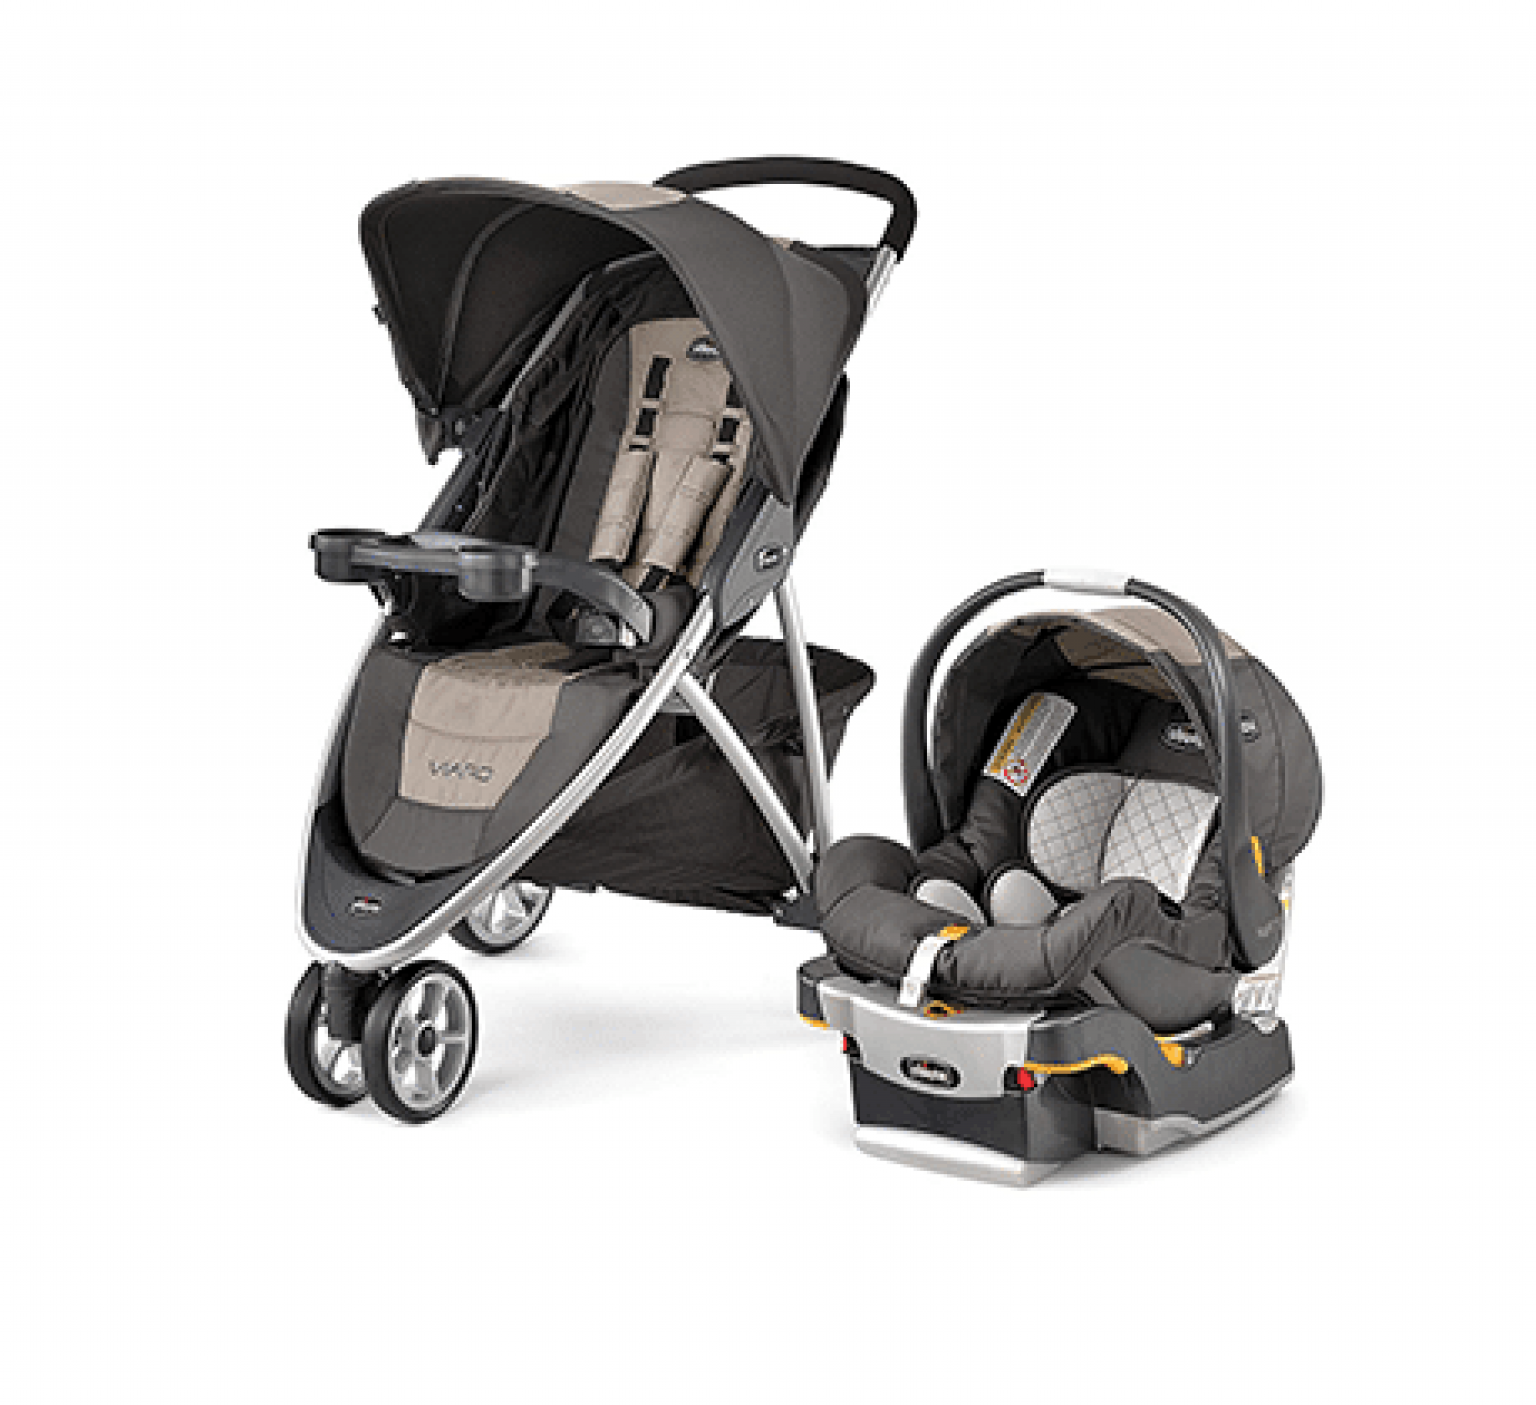 Chicco Viaro Travel System Review for 2019 | Traveling Baby